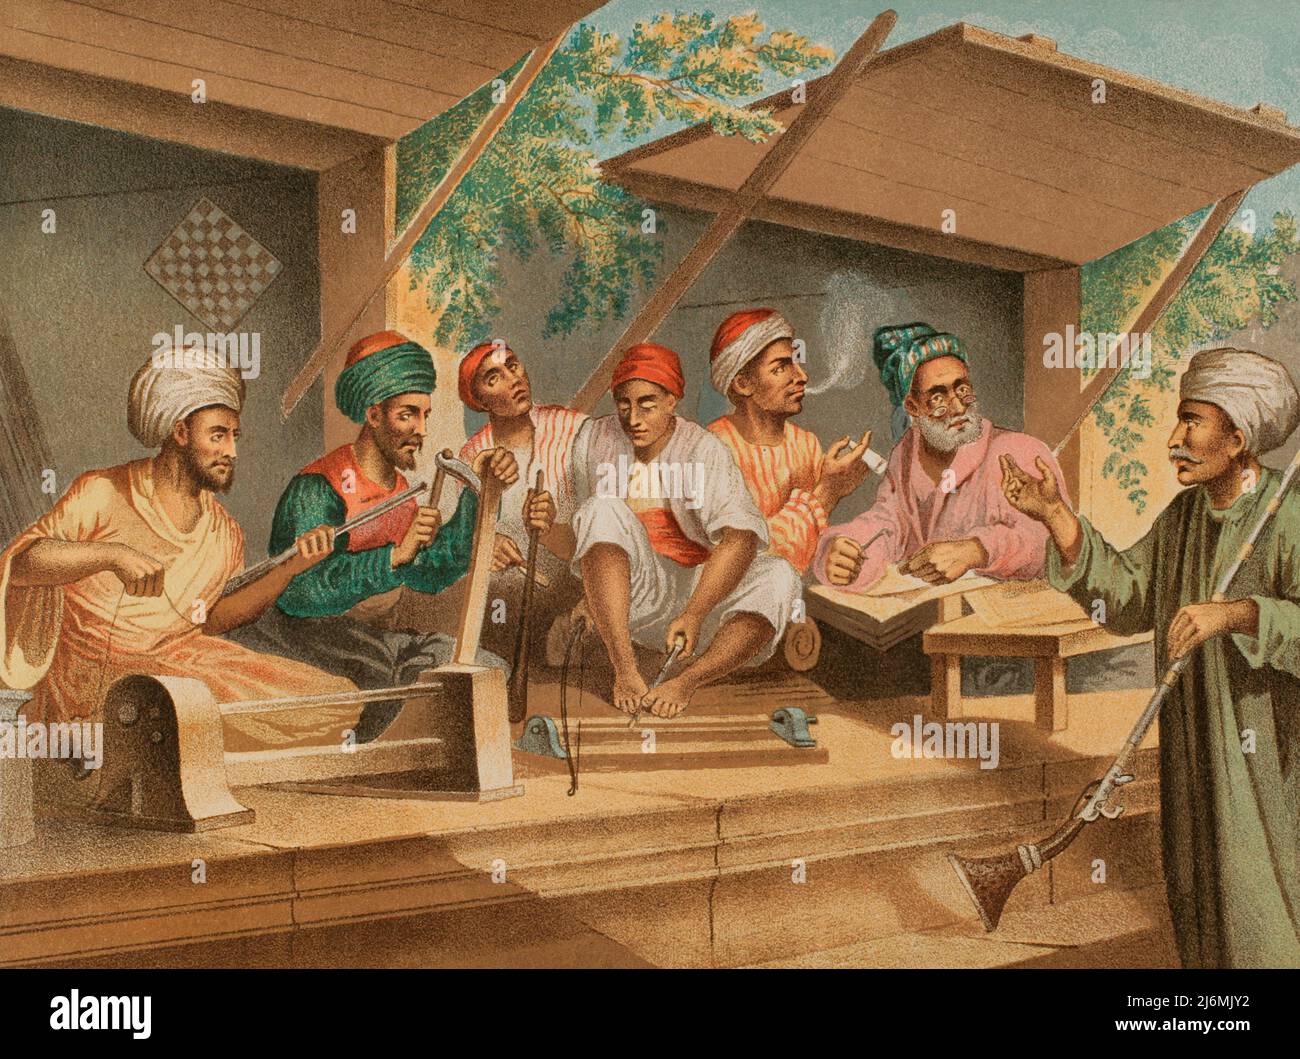 Turkish craftsmen in Constantinople. From left to right: passementerie maker, pipe maker, wood turners, babouche embroiderer and gunsmith. Chromolithography. Illustration by José Acevedo. Lithograph by José Maria Mateu. "Viaje a Oriente", 1878. Stock Photo